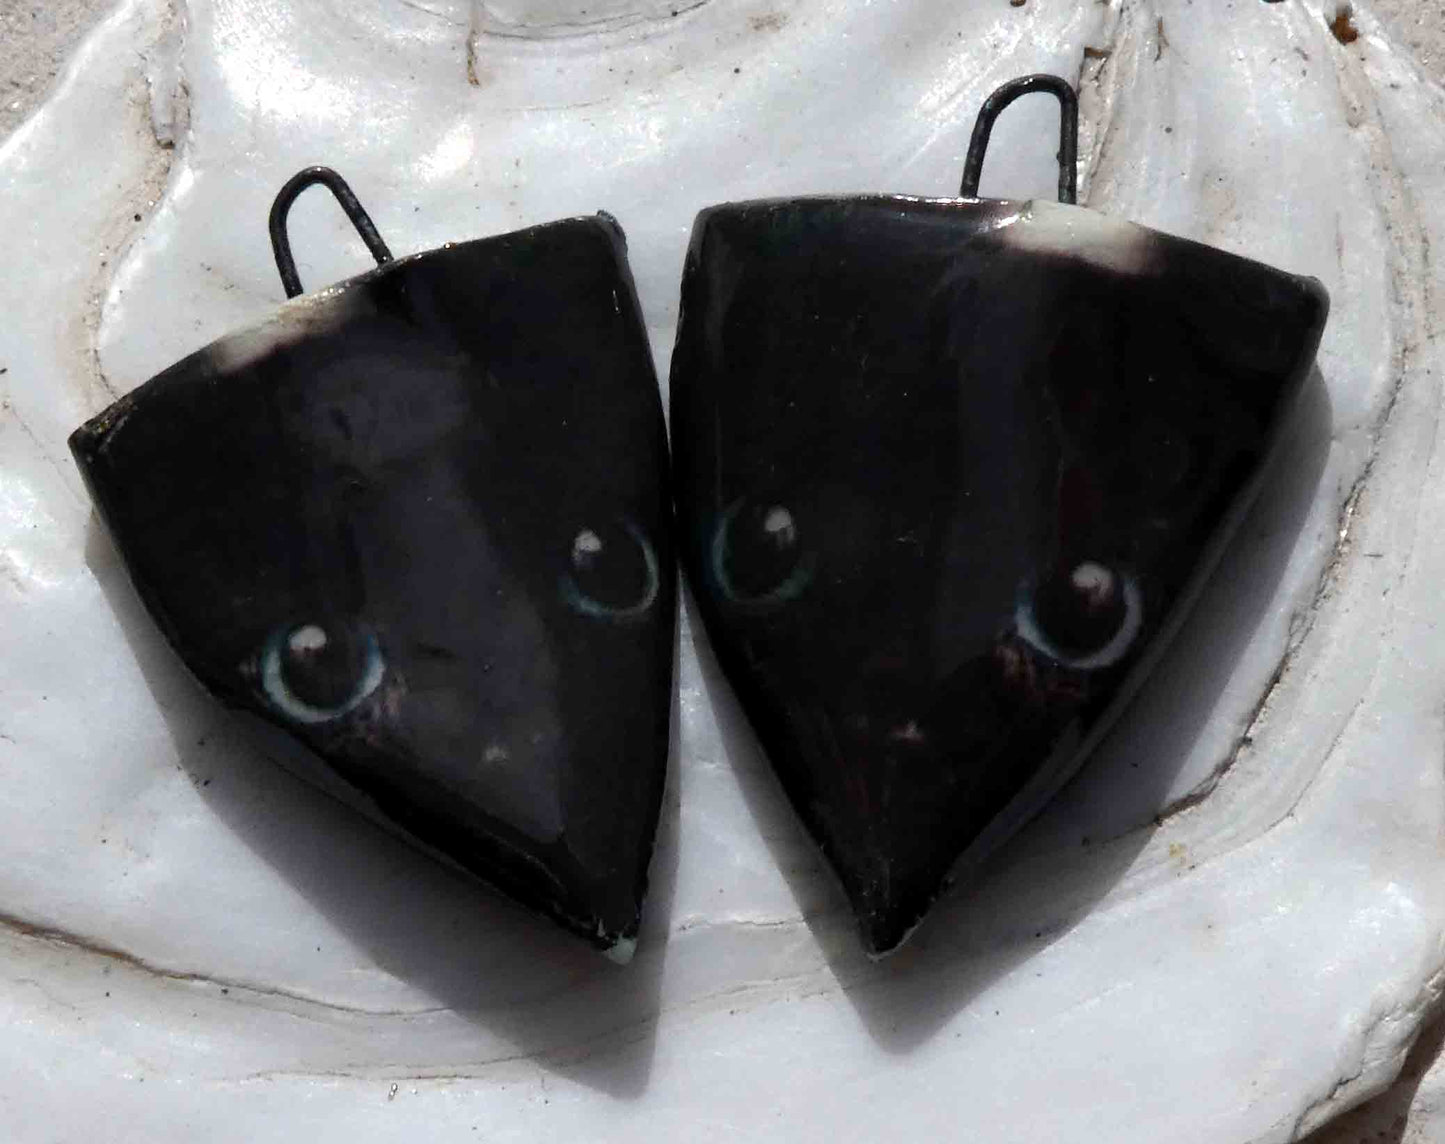 Ceramic Spooky Decal Shield Earring Charms -Black Cat #3